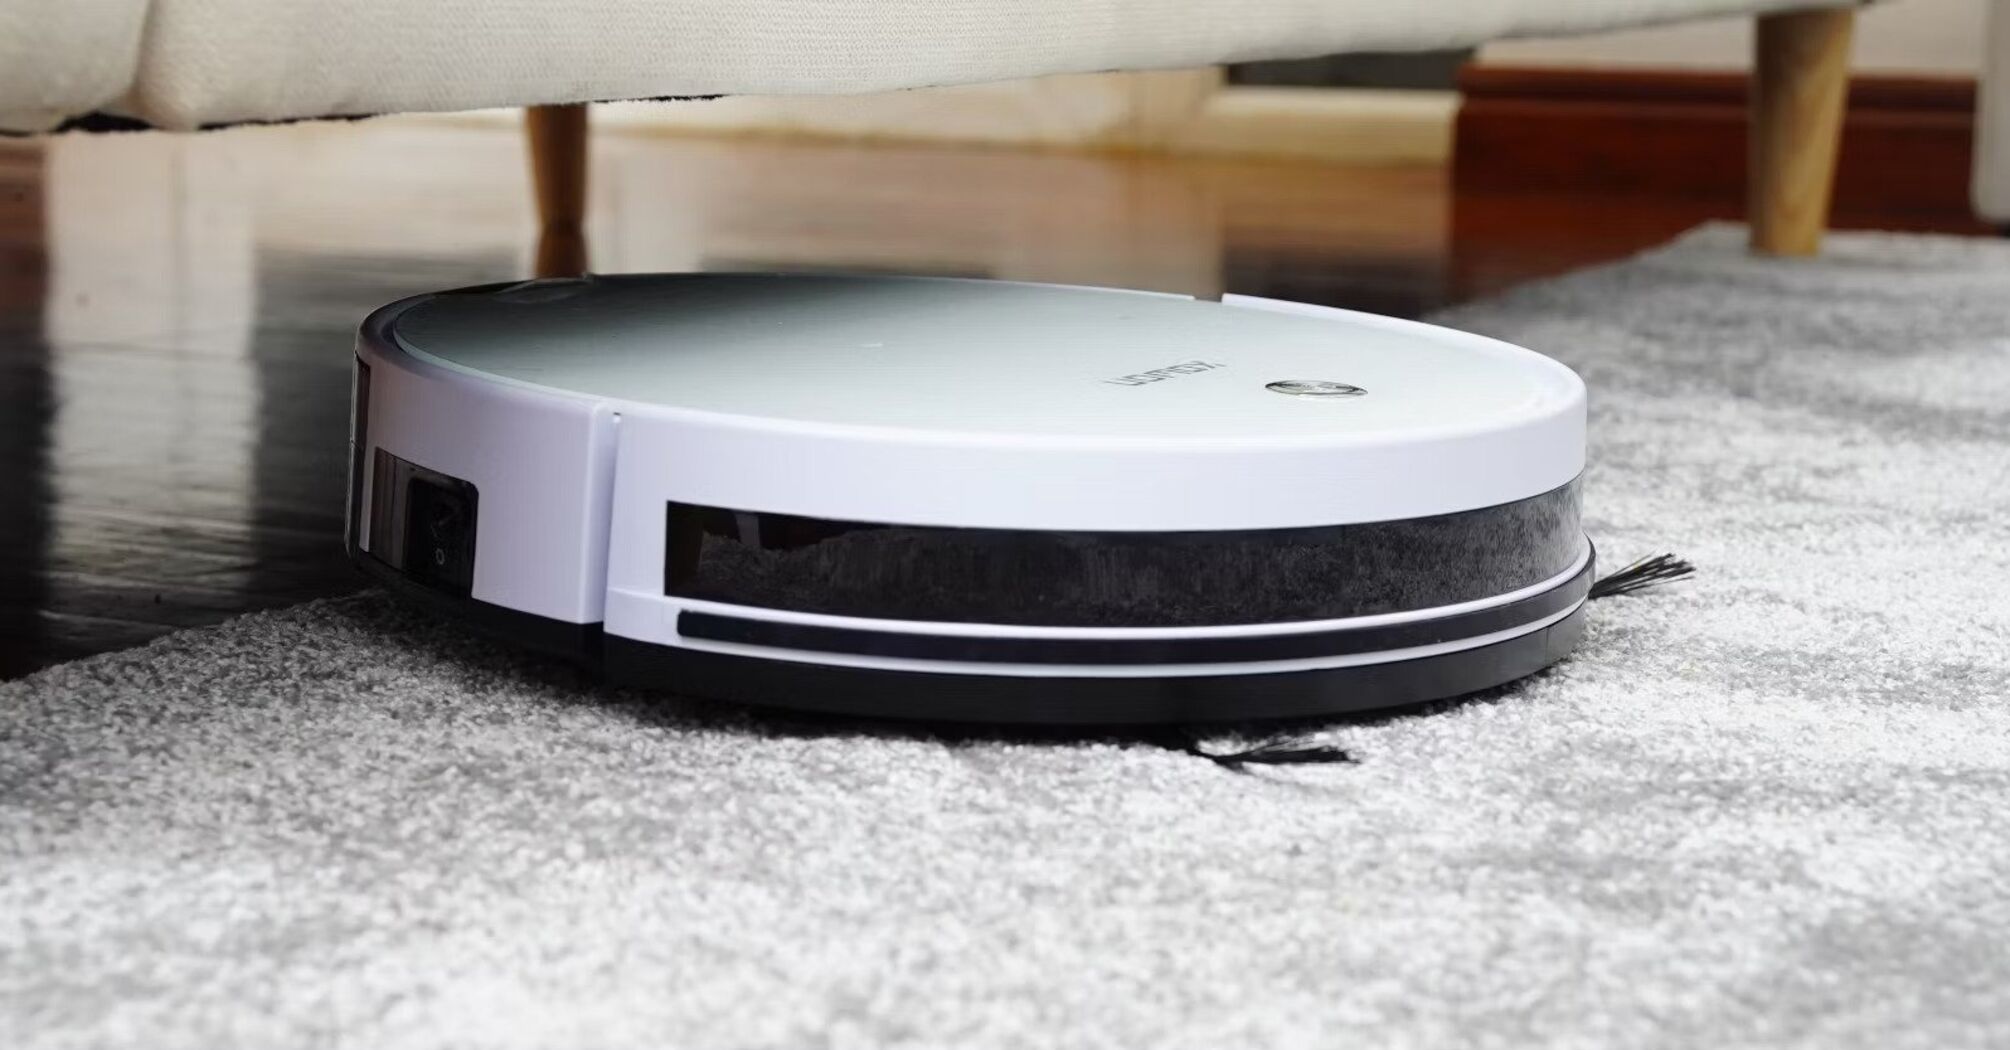 What you need to know about robotic vacuum cleaners